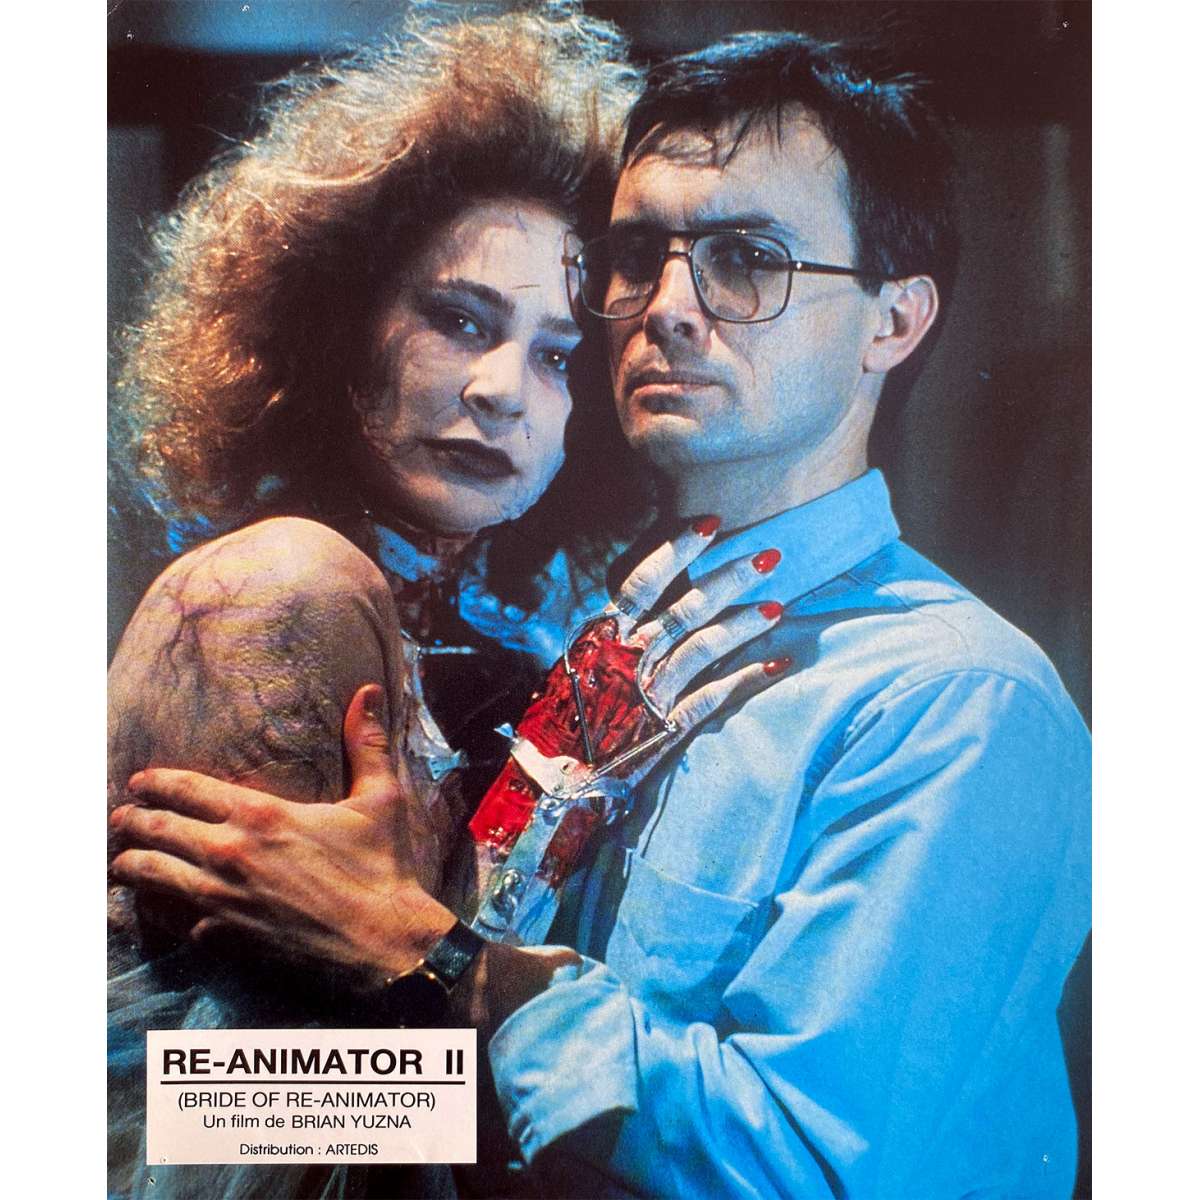 BRIDE OF RE-ANIMATOR French Lobby Card - 9x12 in. - 1990 N2